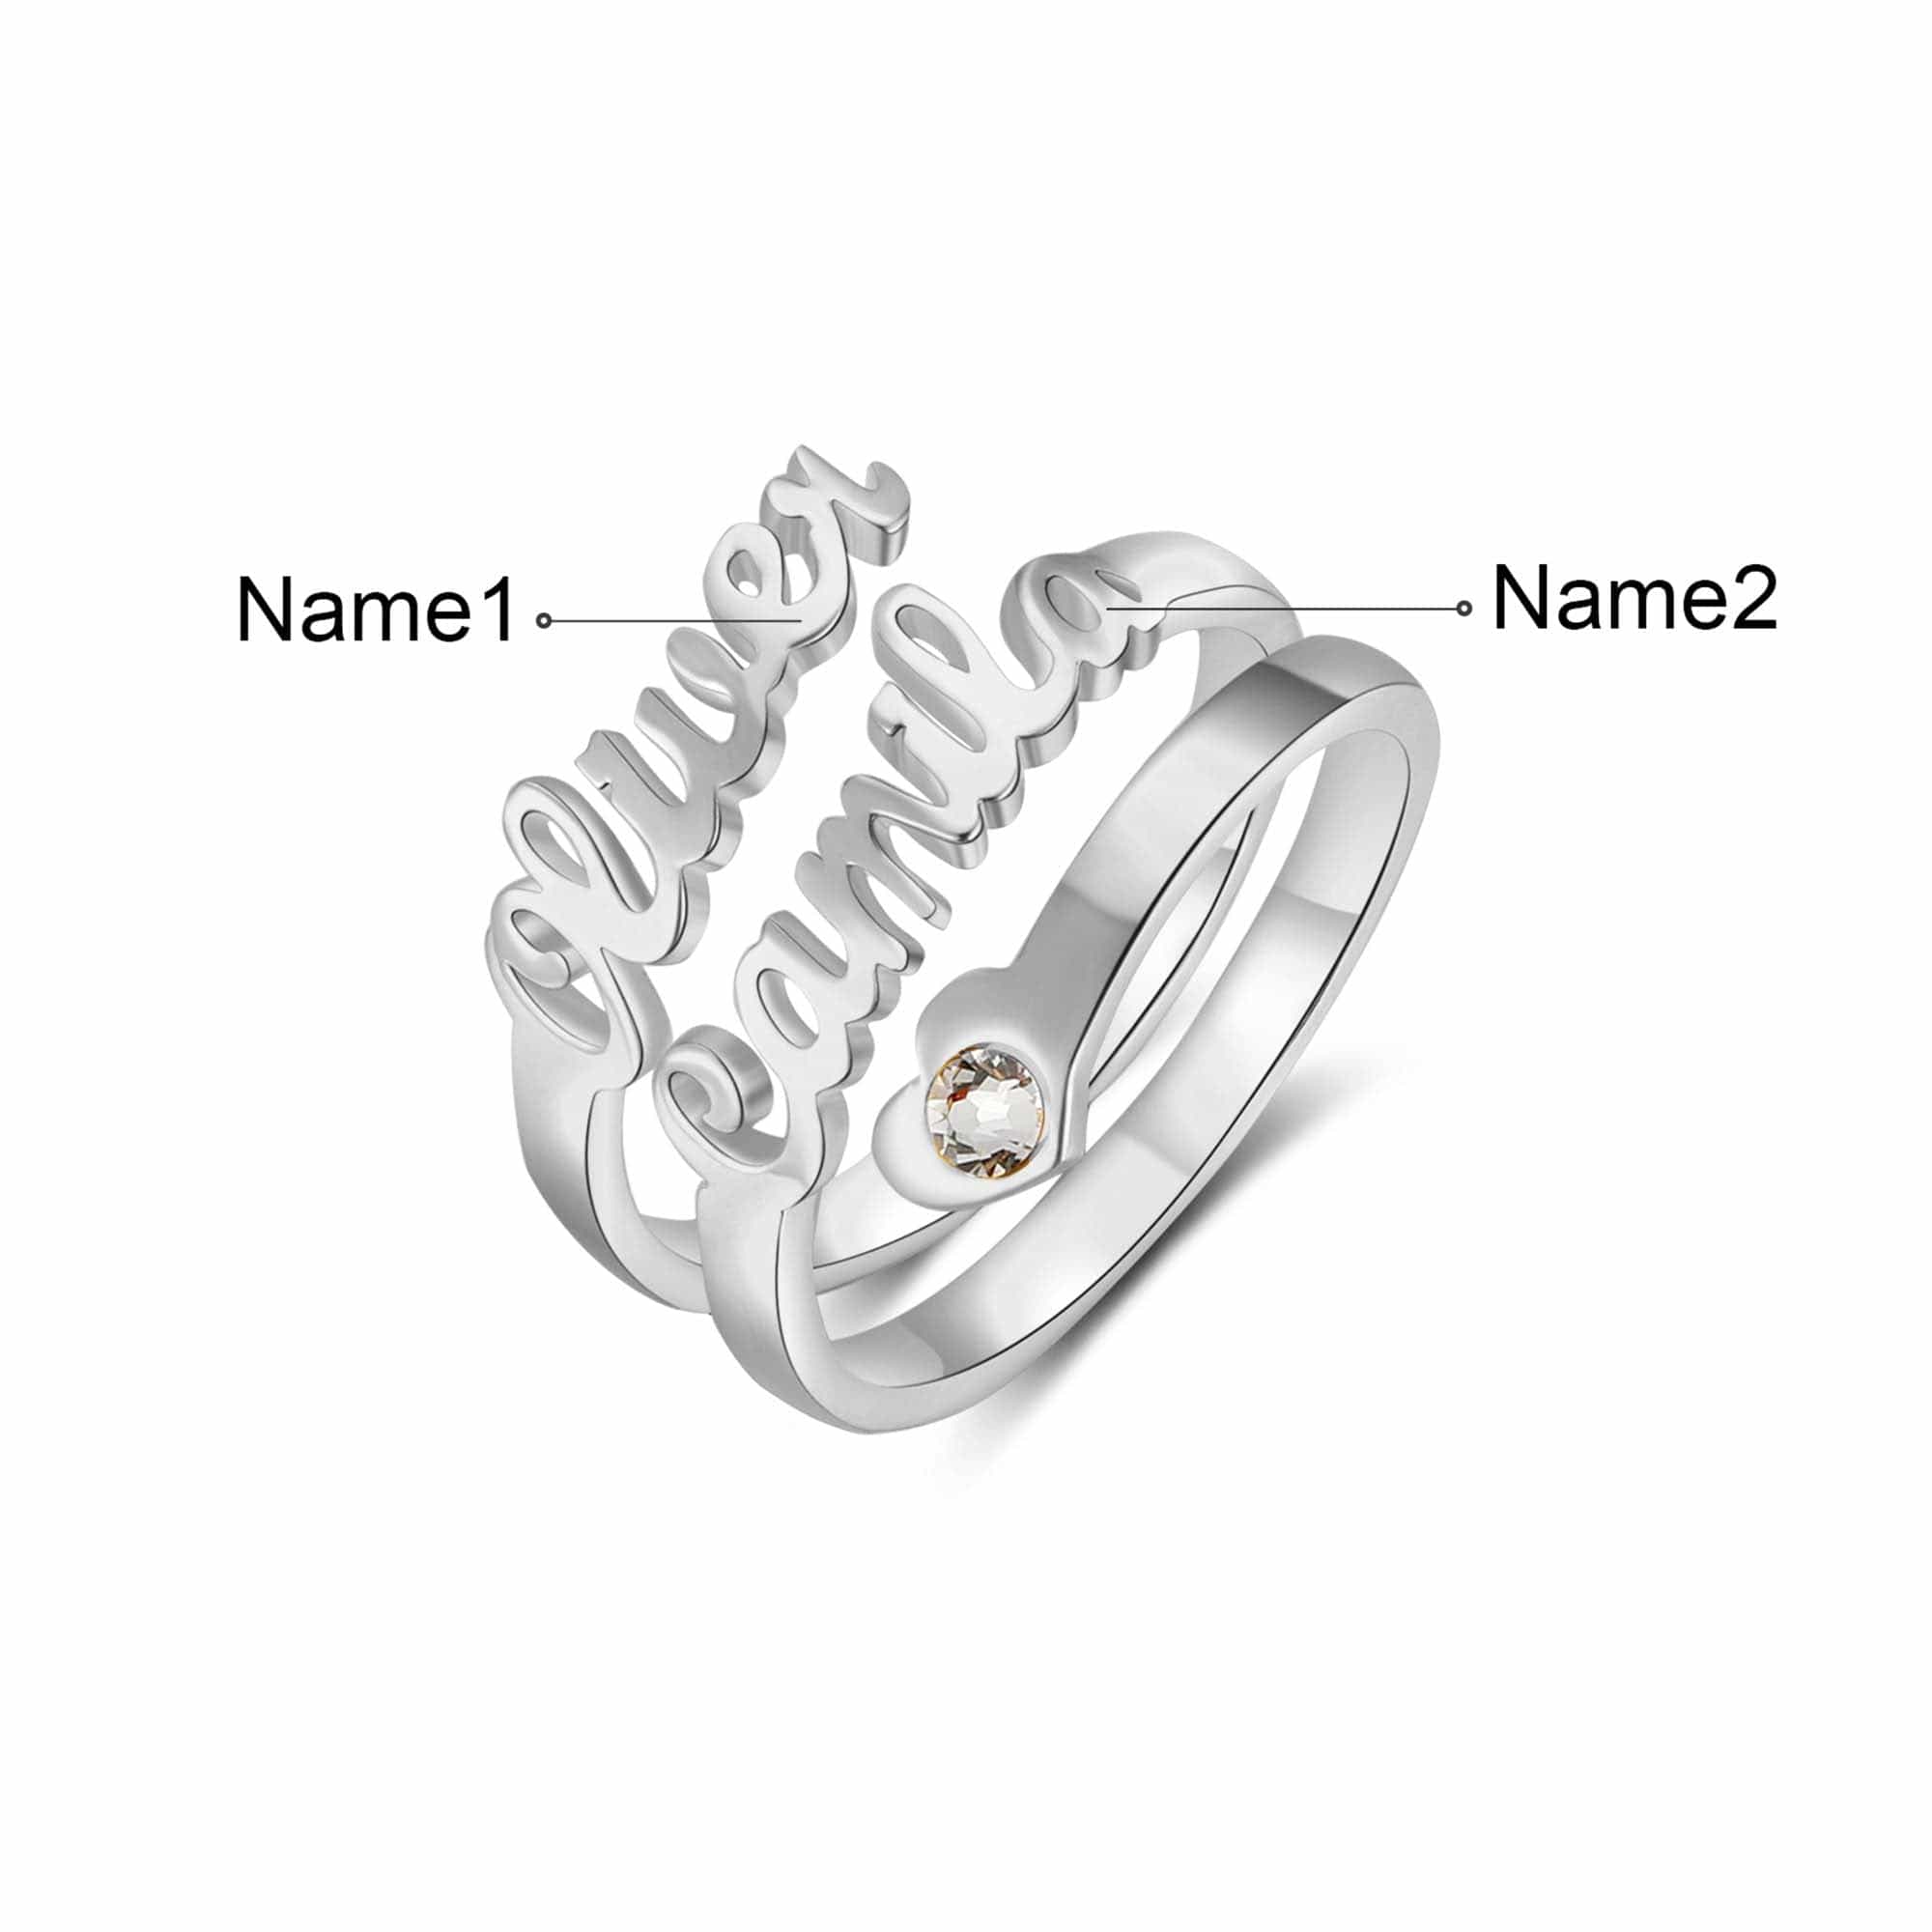 Keepsake Personalized Family Jewelry Engraved Name Stacking Ring available  in Sterling Silver - Walmart.com